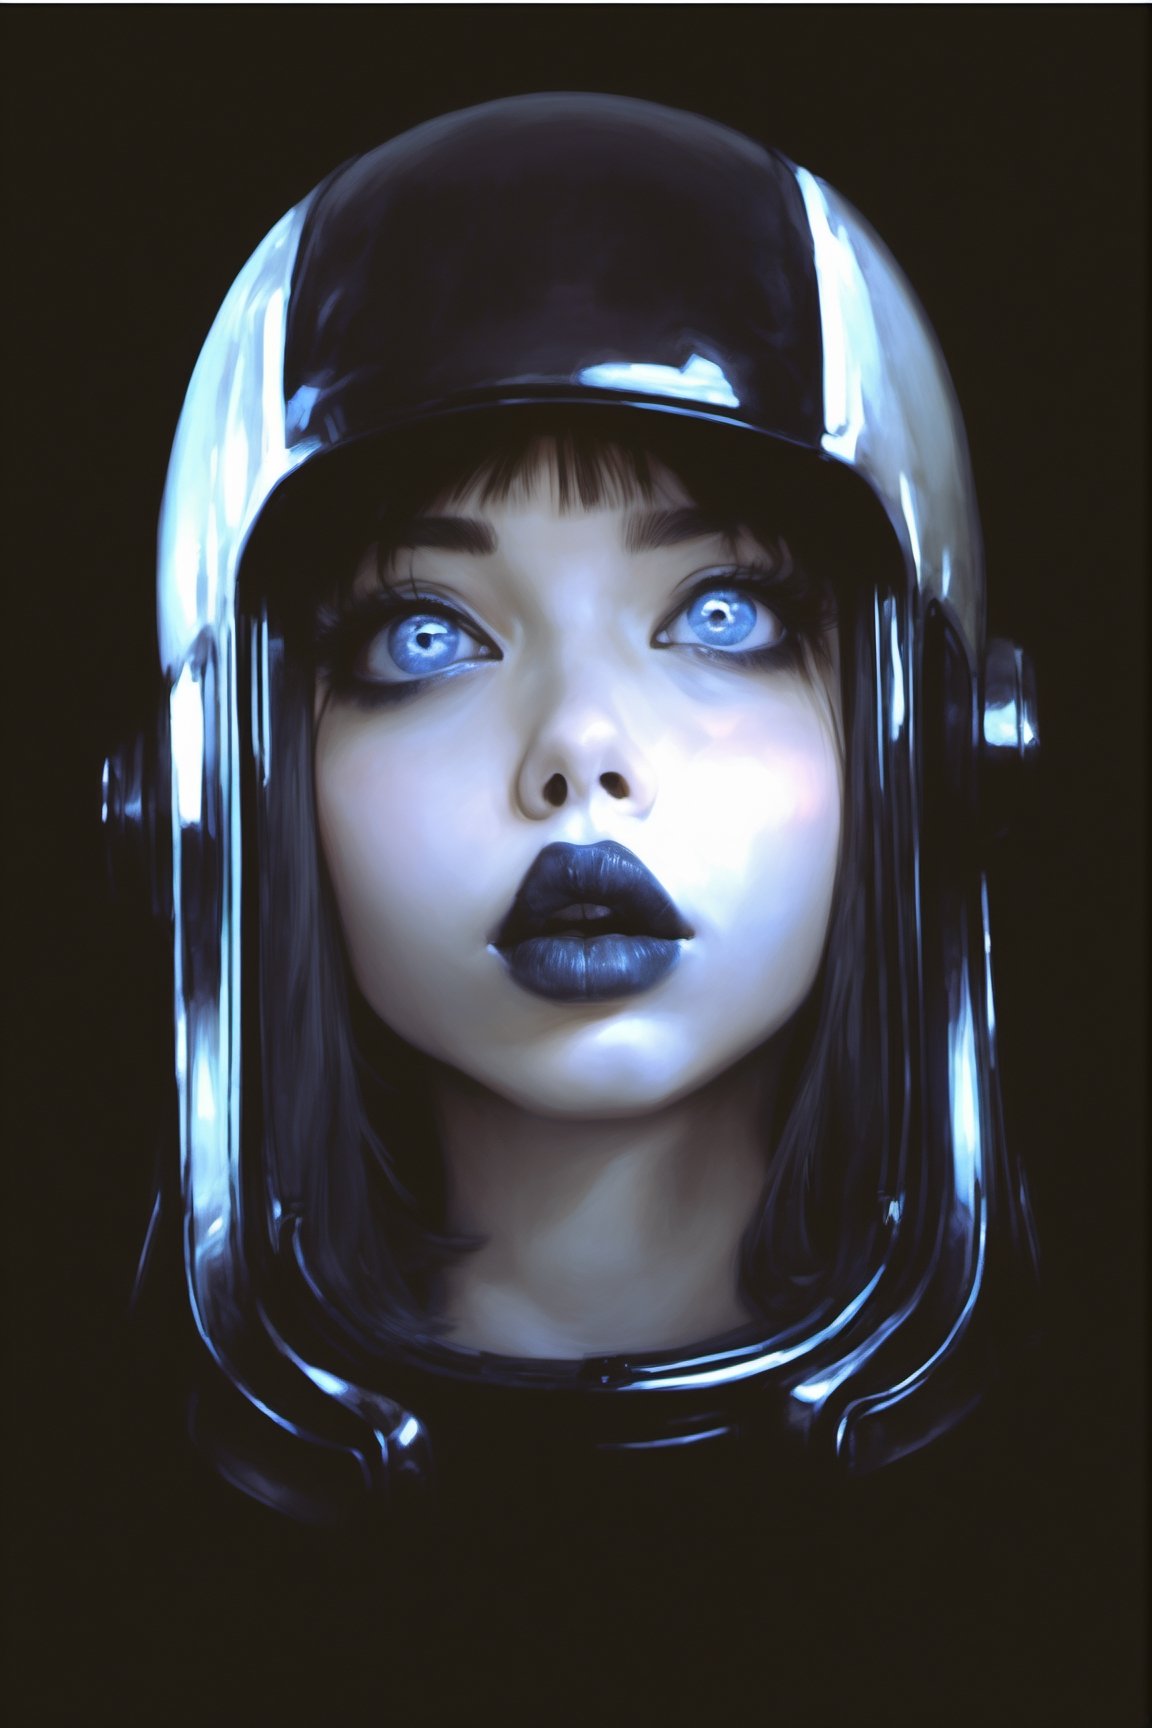 (1girl) beautiful eyes, high detail, ((clear face)), light falls on her face, art by Masamune Shirow, art by J.C. Leyendecker, {{front facing}}},  {{{facing the viewer}}}, a masterpiece, stunning beauty, hyper-realistic oil painting, vibrant colors, a xenomorph, dark chiarascuro lighting, a telephoto shot, 1000mm lens, f2,8, ,digital artwork by Beksinski, beautiful girl in space helmet with see through visor, Gopn1k, DonMD4rk3lv3sXL, beyond_the_black_rainbow, K-Eyes